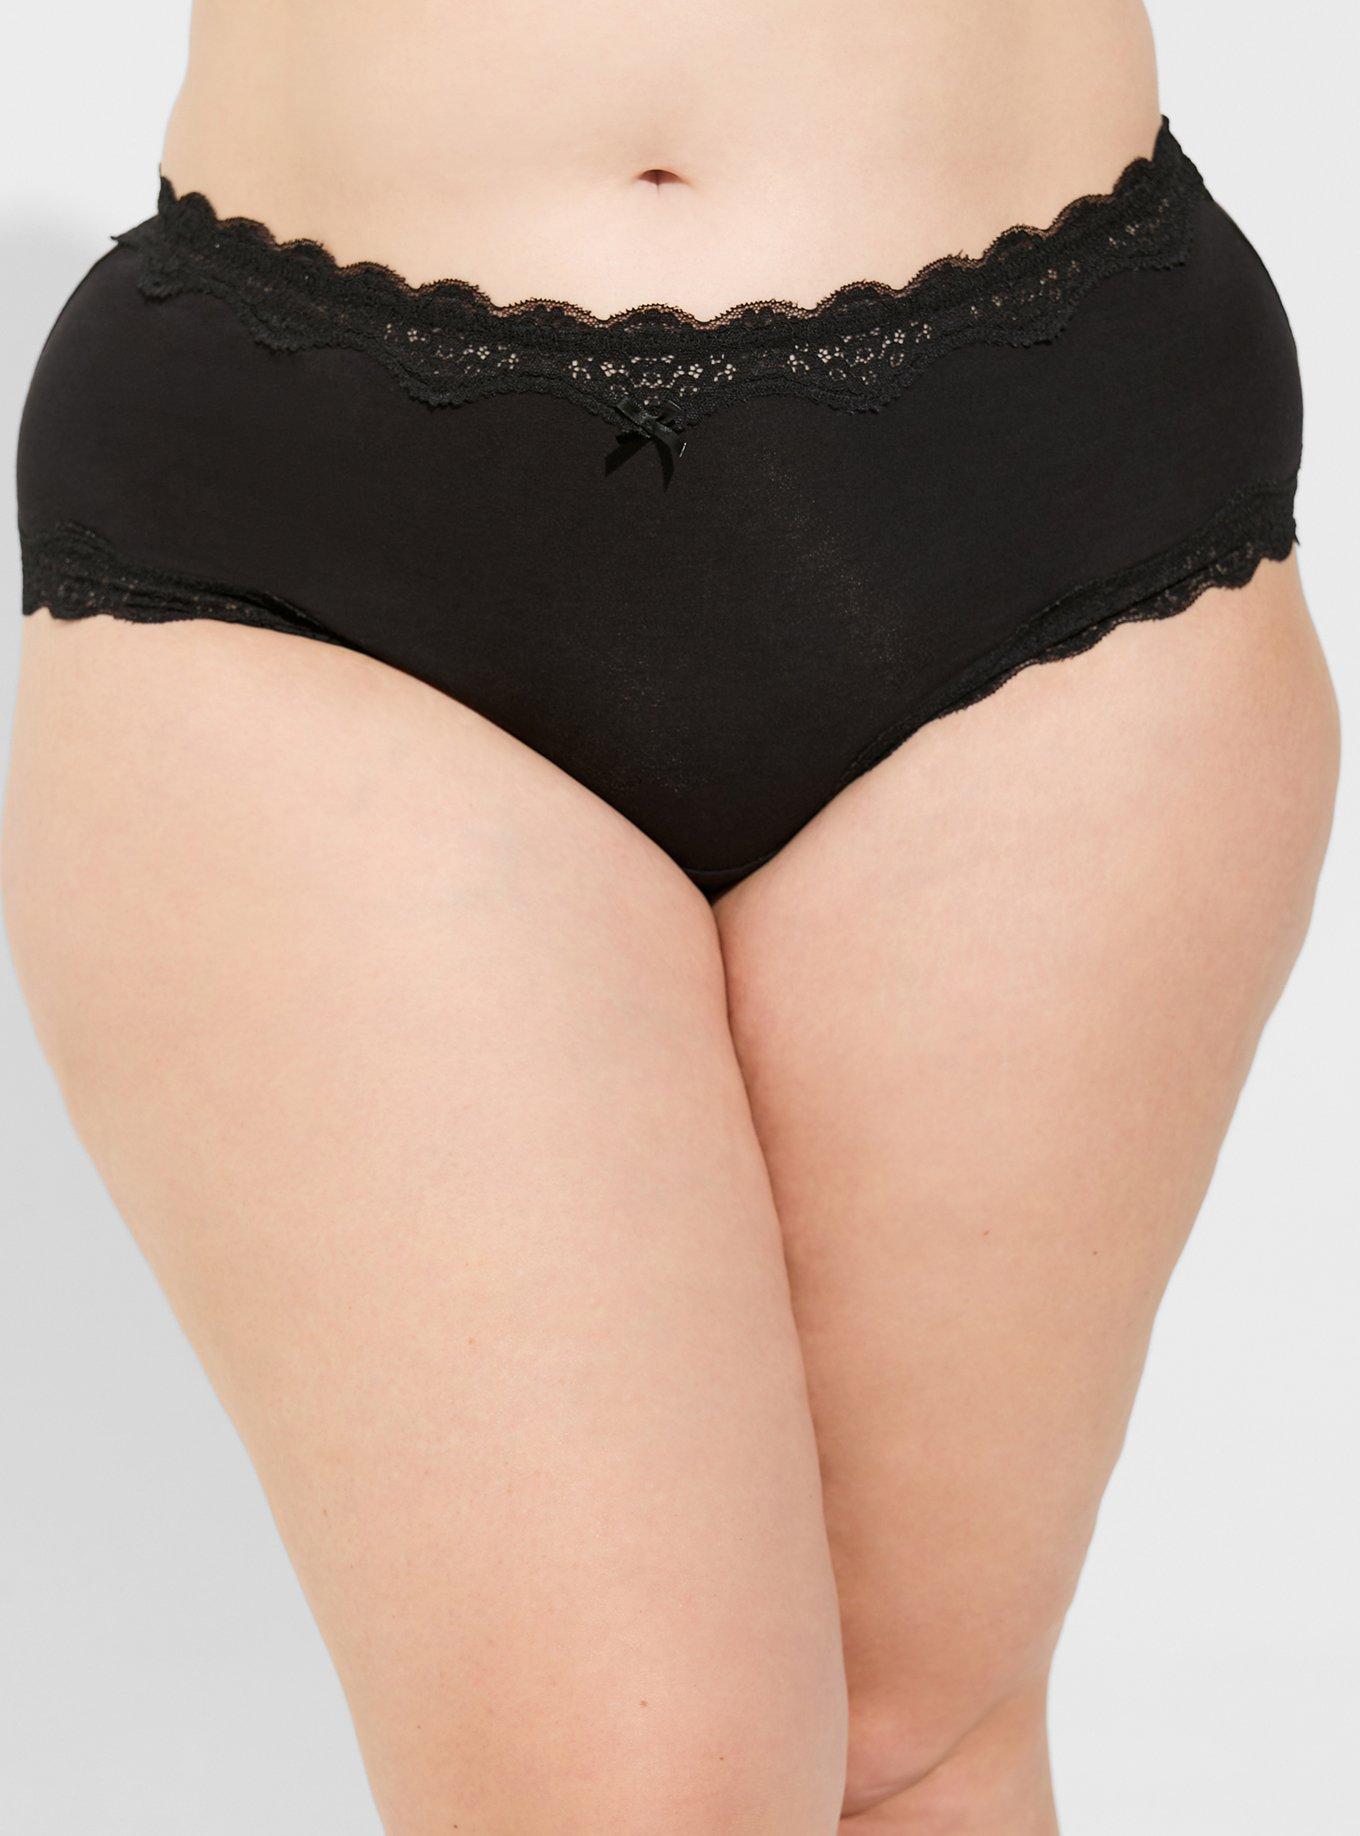 Torrid Cheeky Panties Underwear 2 pair Cotton Wide Lace waistband Plus Size  2 